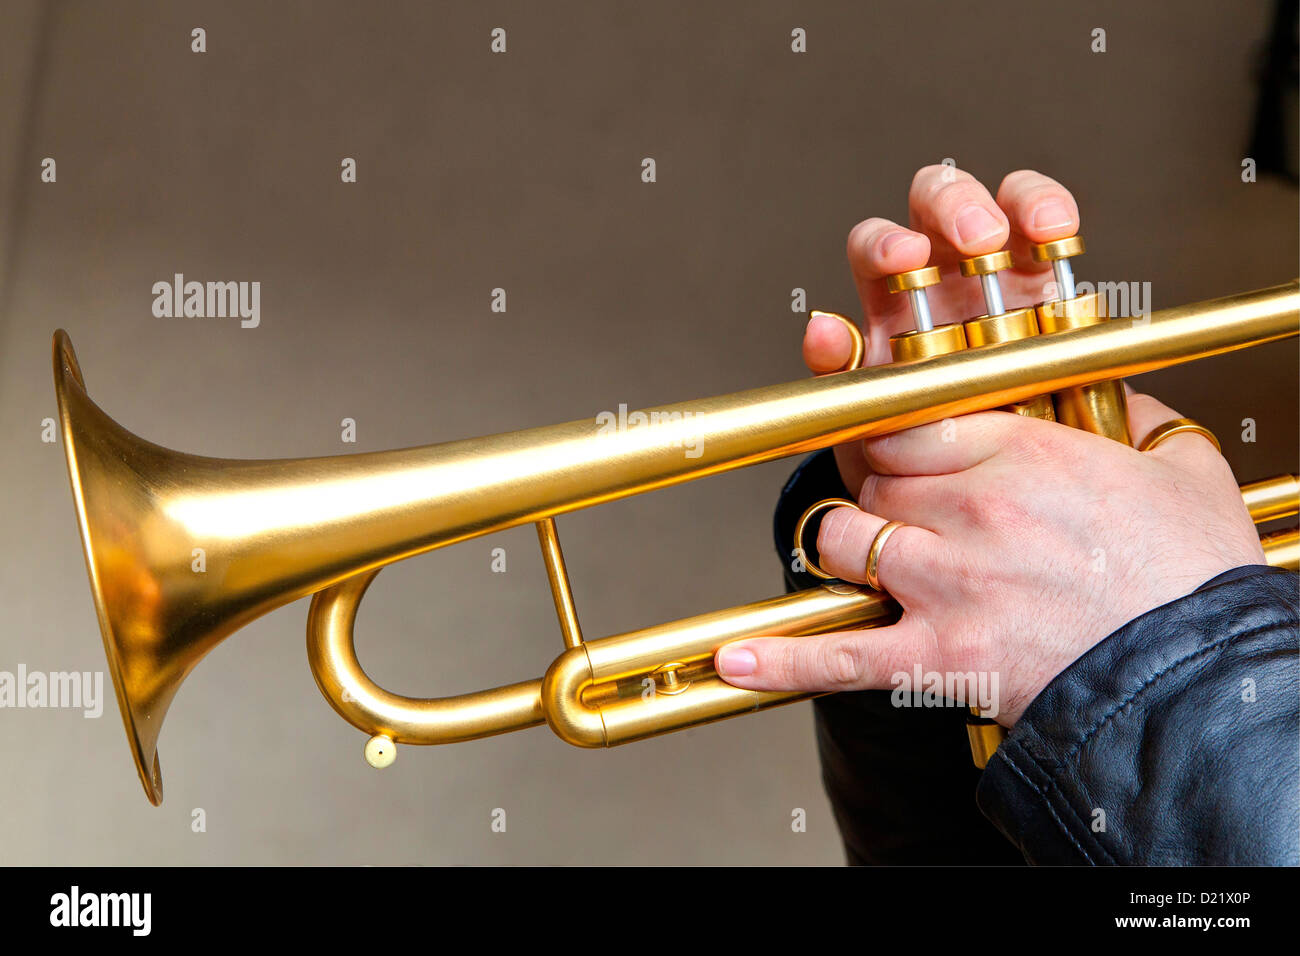 Trumpet High Resolution Stock Photography and Images - Alamy